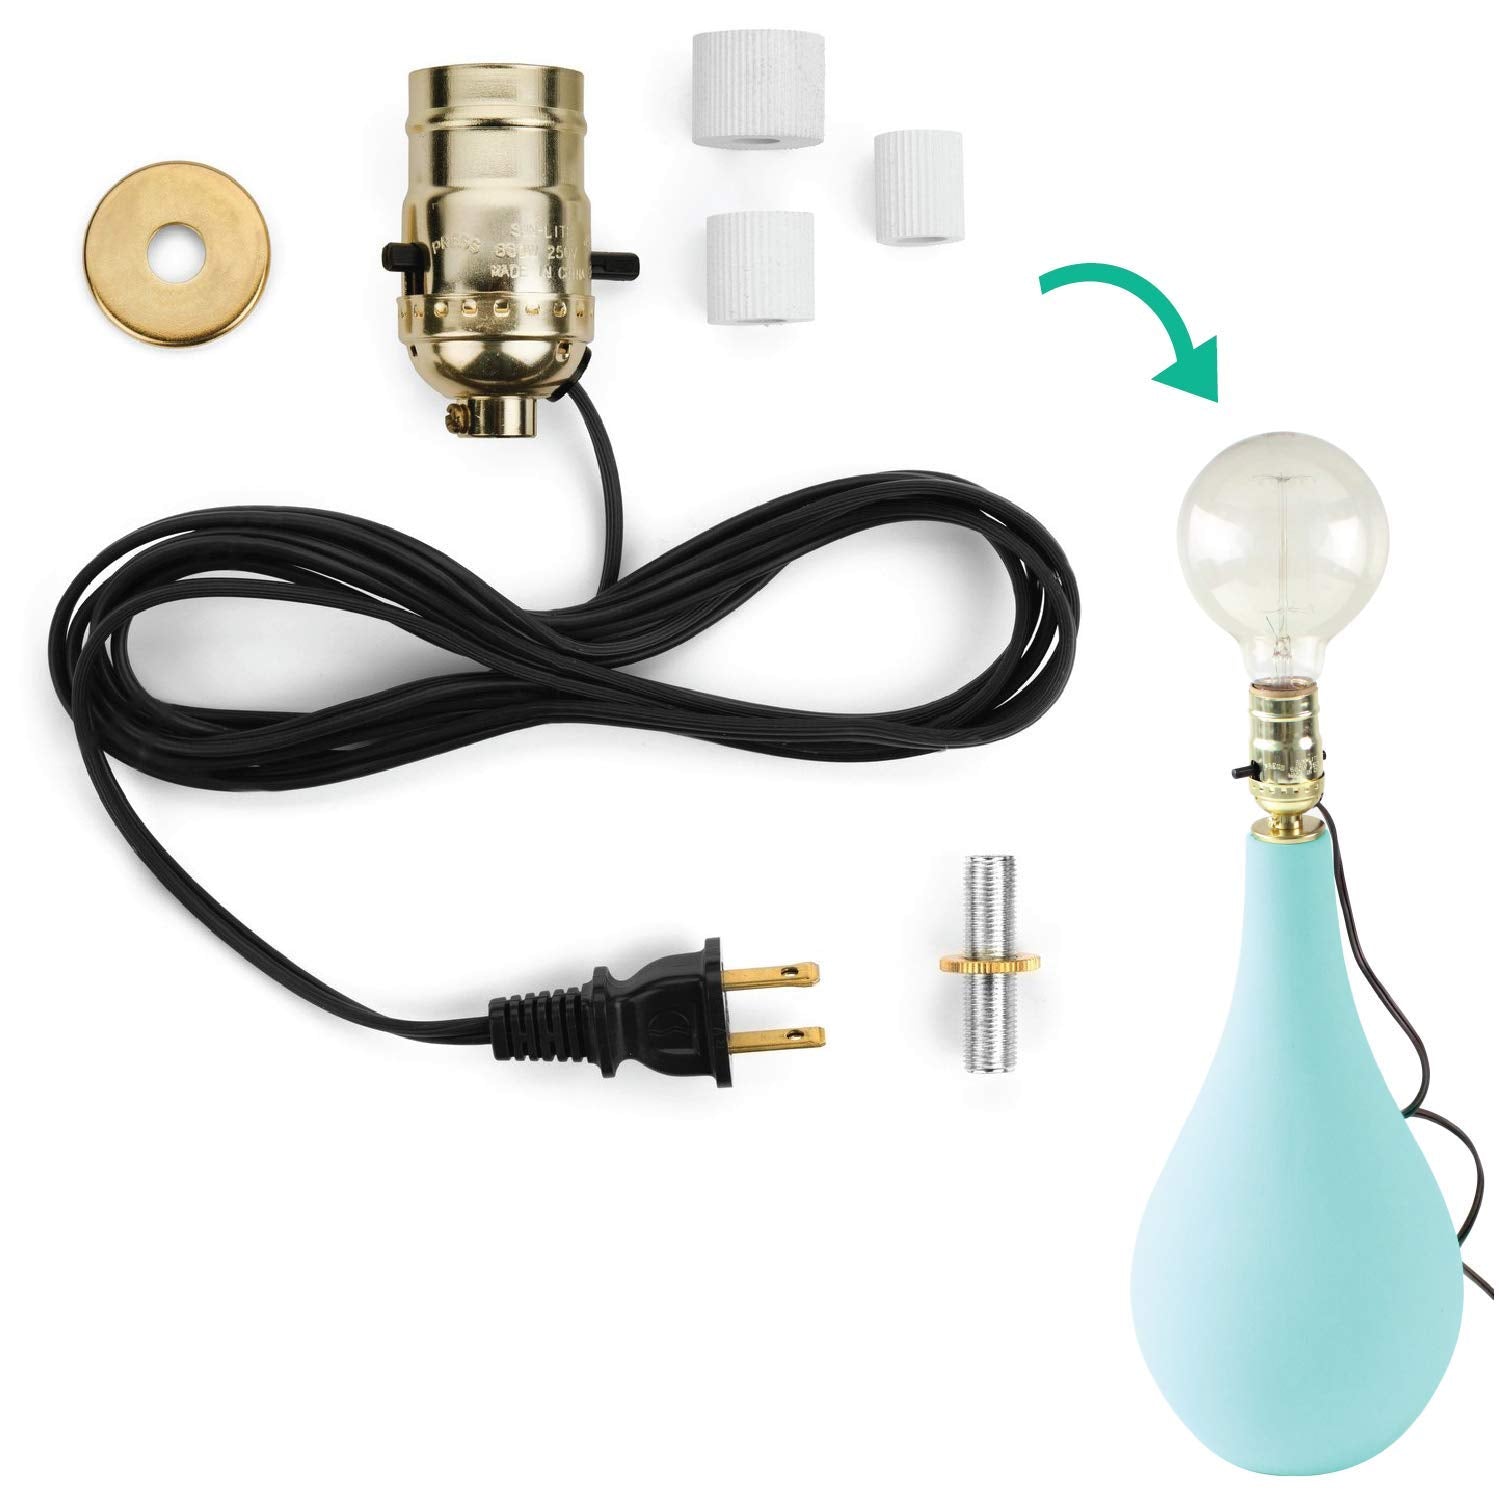 I Like That Lamp DIY Bottle Lamp Kit 1 Pack - Silver Socket + 8FT Silver  Cord - Convert Any Wine, Water, Whiskey or Oil Bottle into a Lamp - Revive